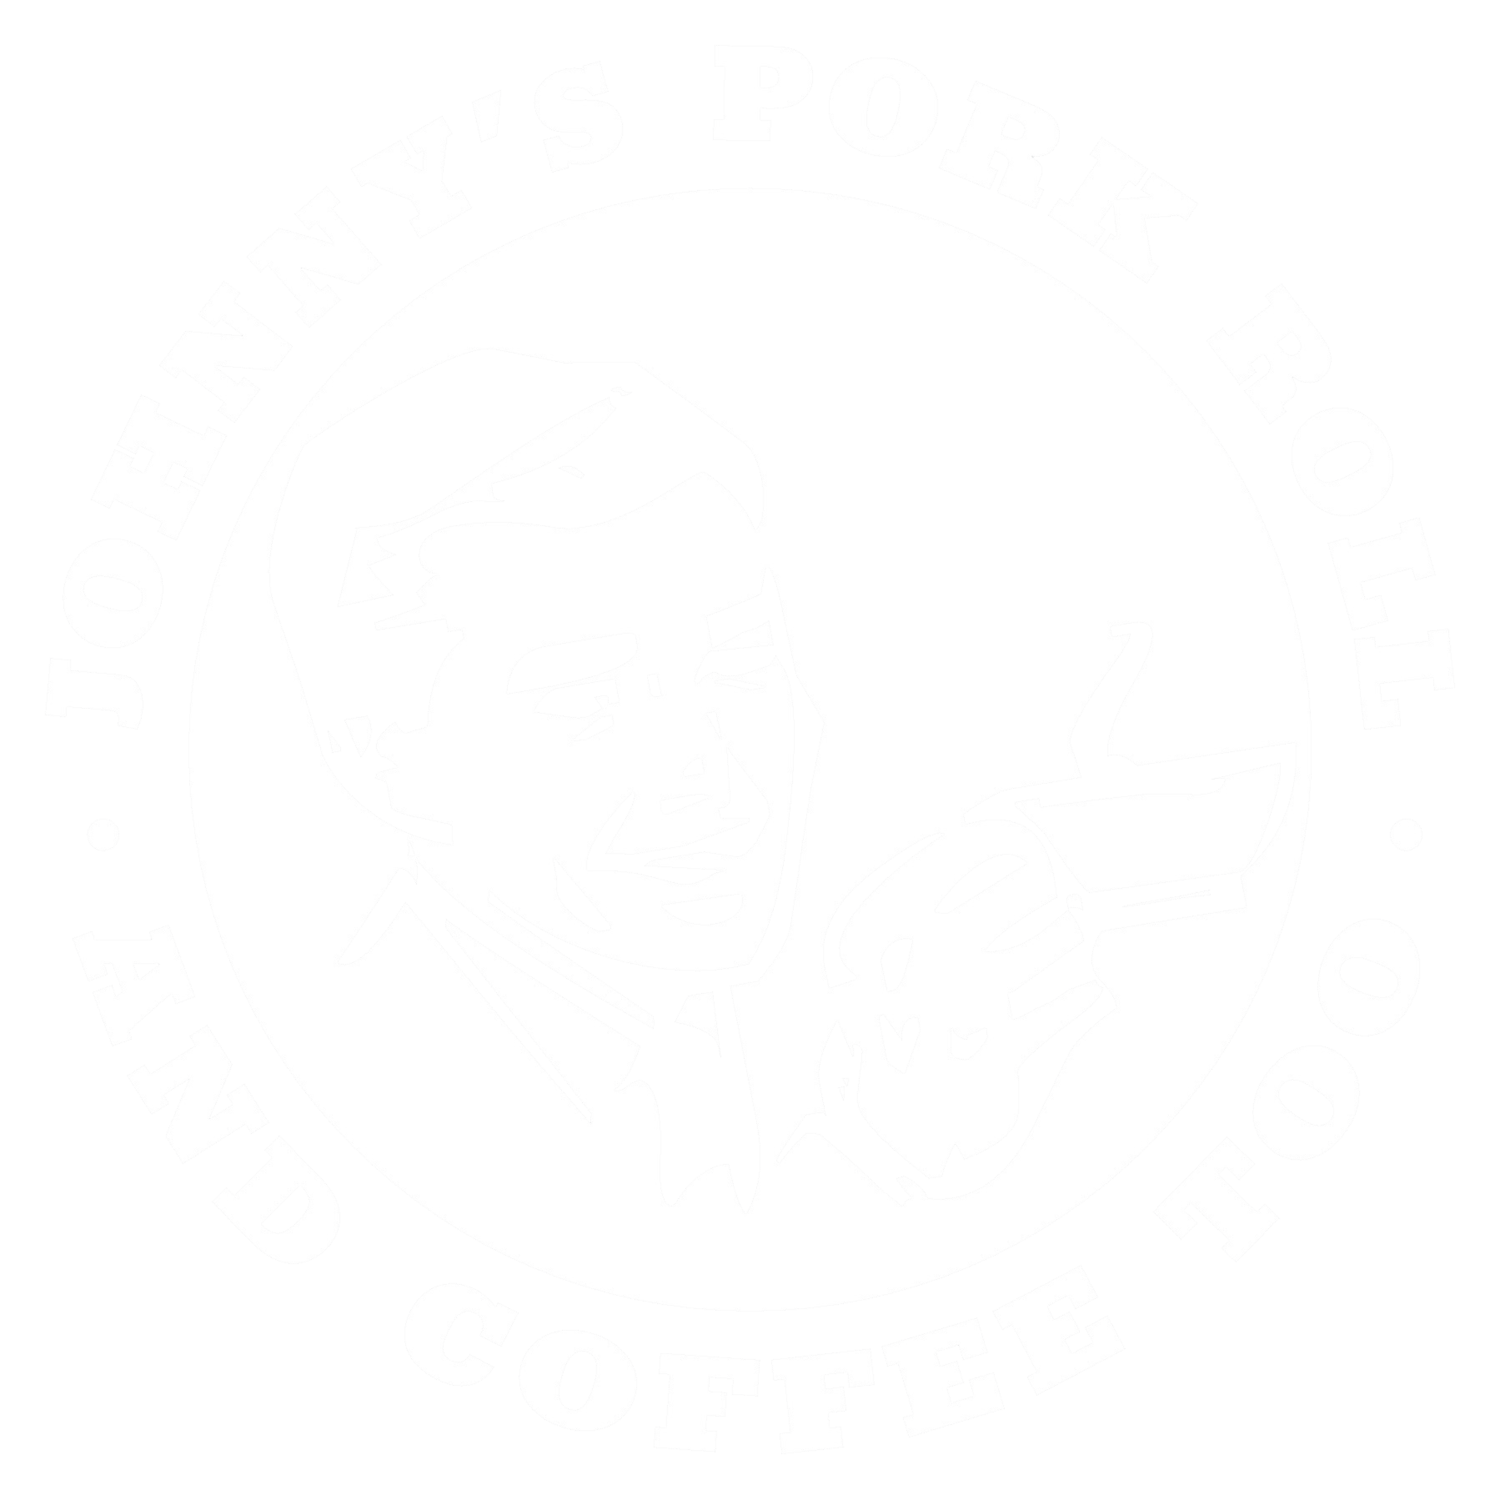 Johnny's Pork Roll and Coffee Too!